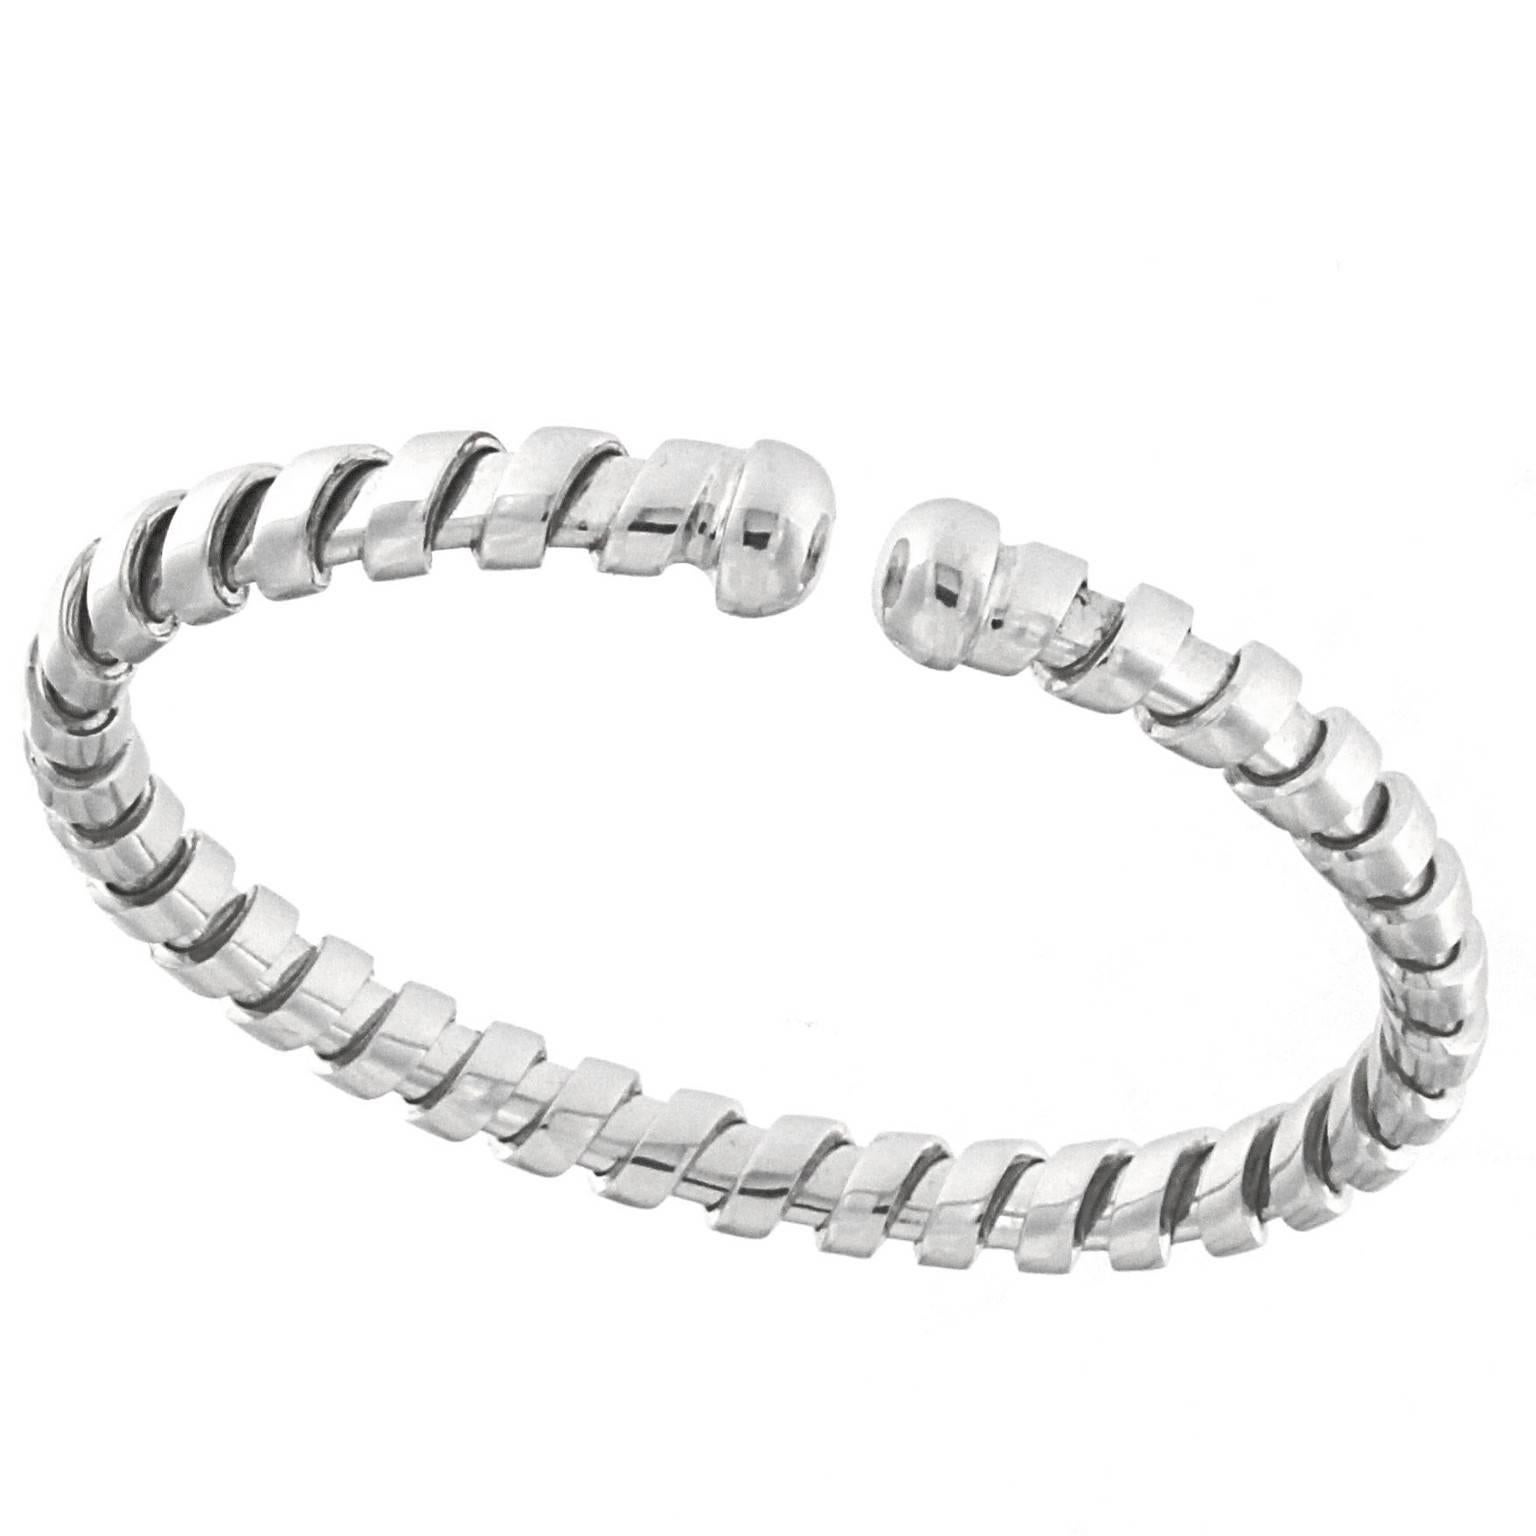 White gold bracelet made of tubogas. Forged on a template that reproduces the wrist fits perfectly. To wear it stretches out thanks to the white gold spring that is inside it
The total weight of the gold is GR 28.60
Stamp 750 10 MI 

